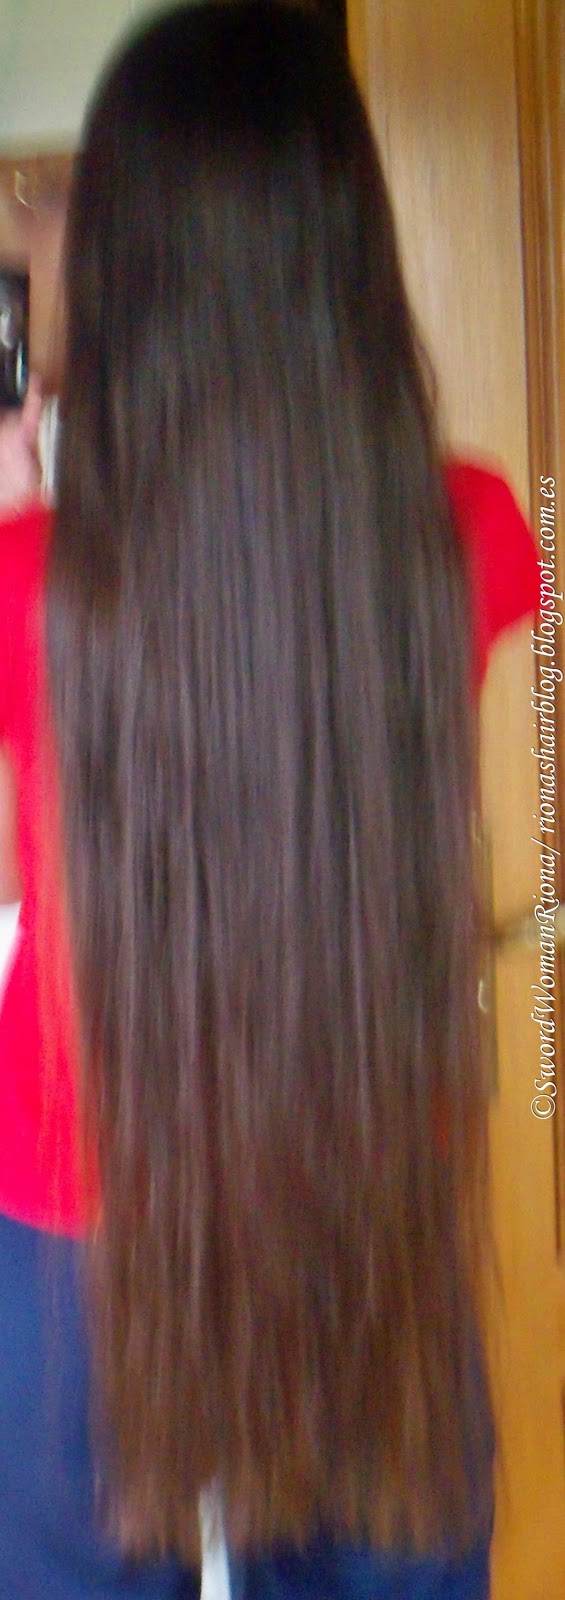 How to grow healthy long and beautiful hair Holistic and Natural Living  DIY  Recipes  Classic Hair Length